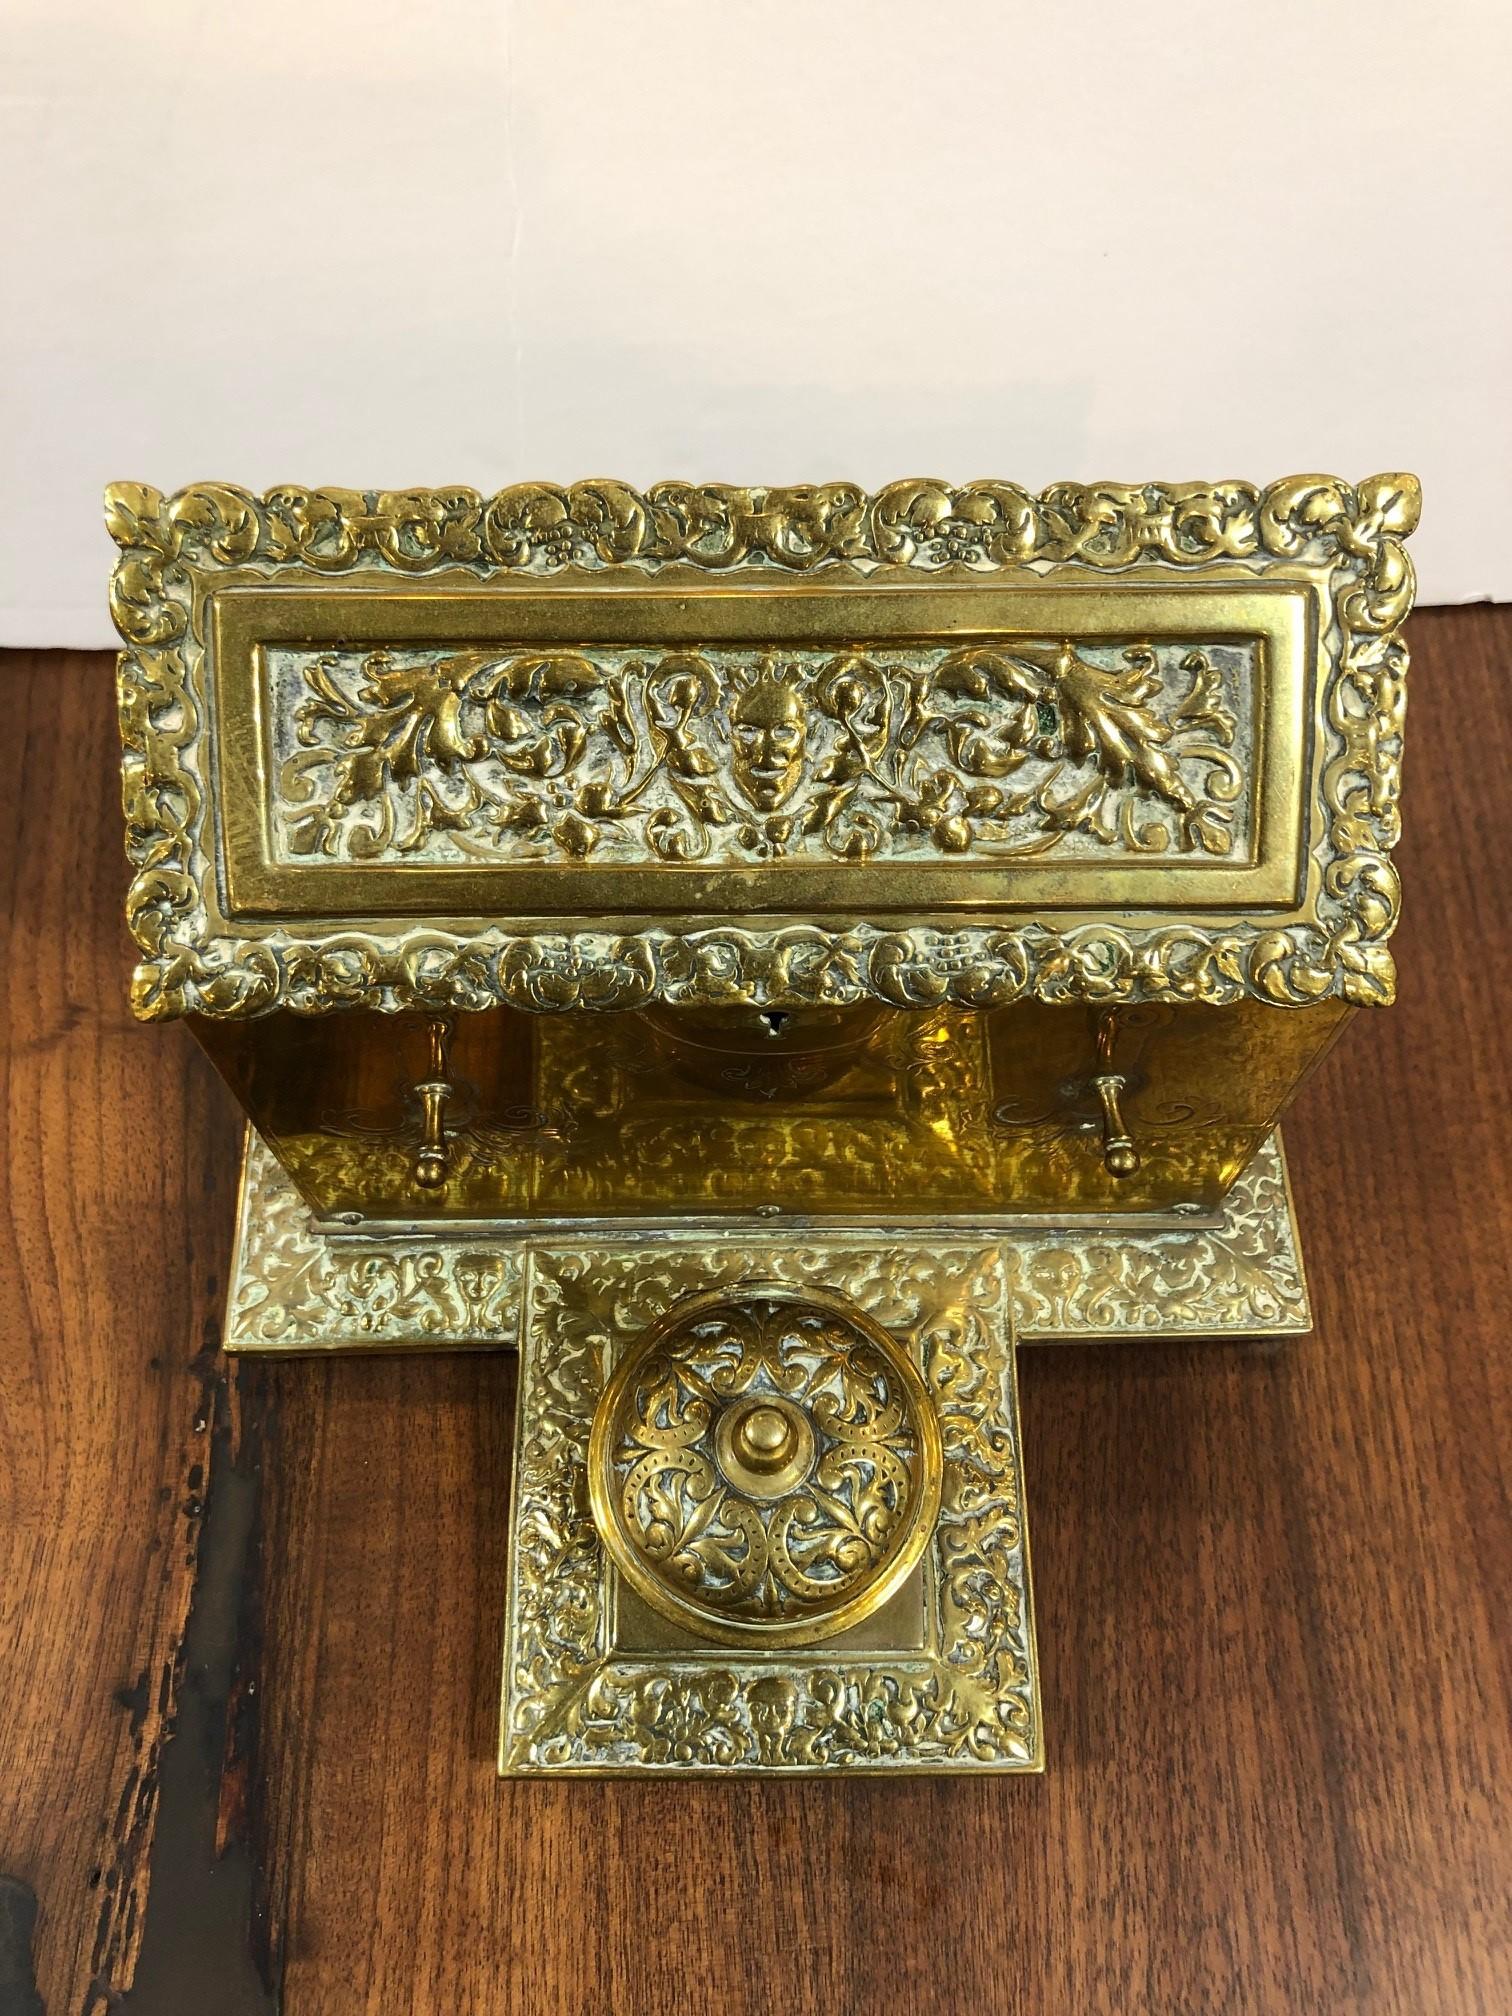 English 1850s decorative brass stationary box and inkwell with an attached lid that opens to sections for cards and envelopes. The inkwell also has an attached lid but no glass insert Together its a nice size and would look great on any desk. This